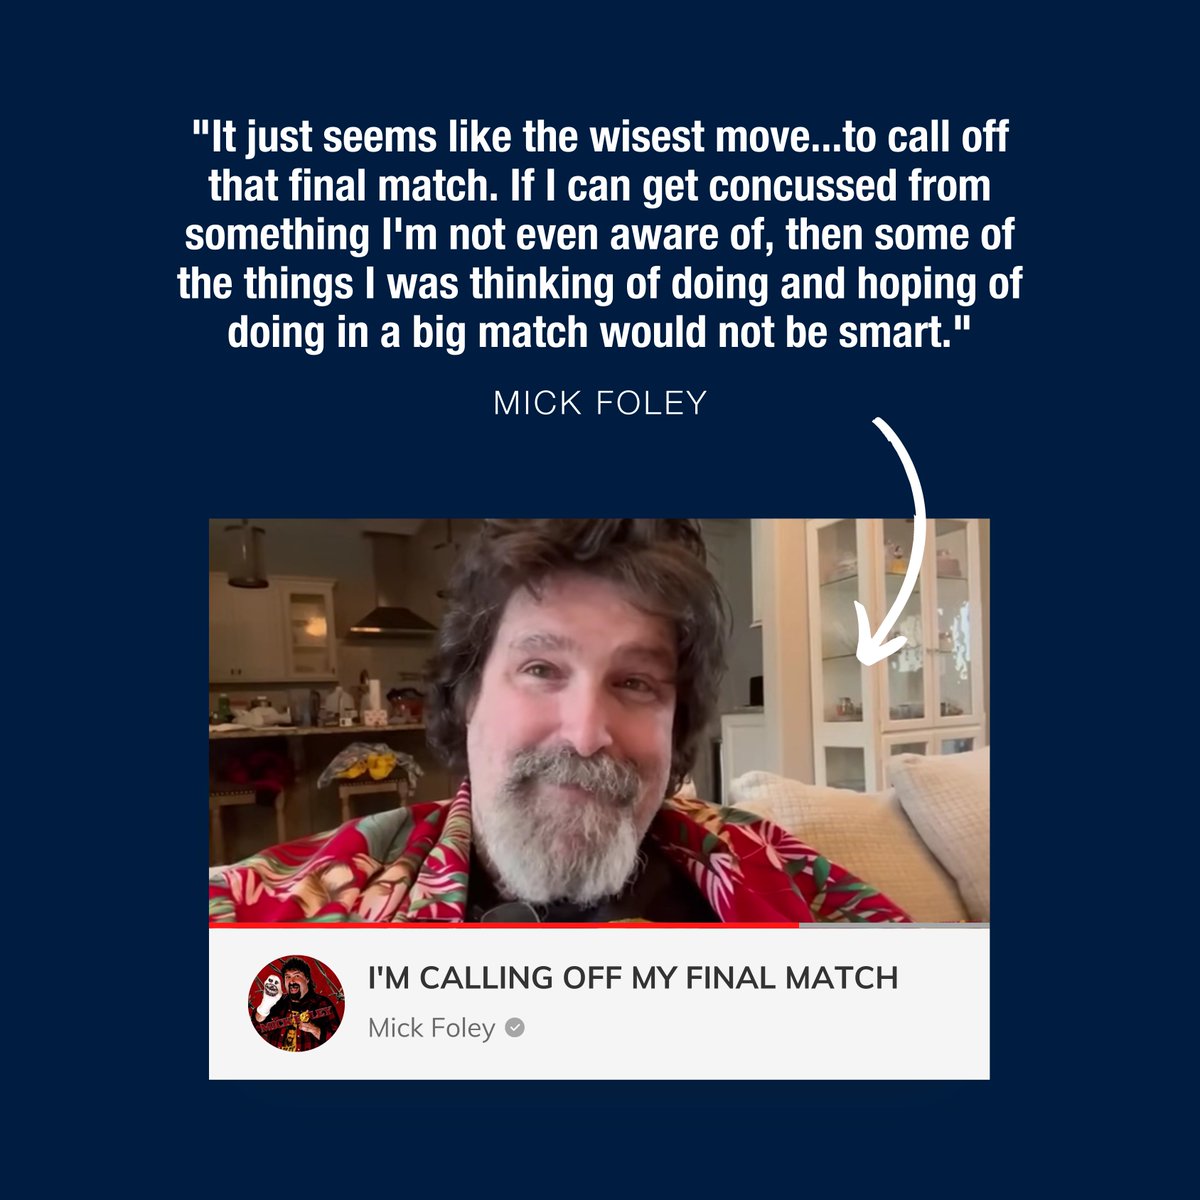 WWE Hall of Famer Mick Foley called off his final match following a recent concussion. He sets a great example: when in doubt, sit it out. We wish Mick the best in his recovery. youtube.com/watch?v=zVoMeX…